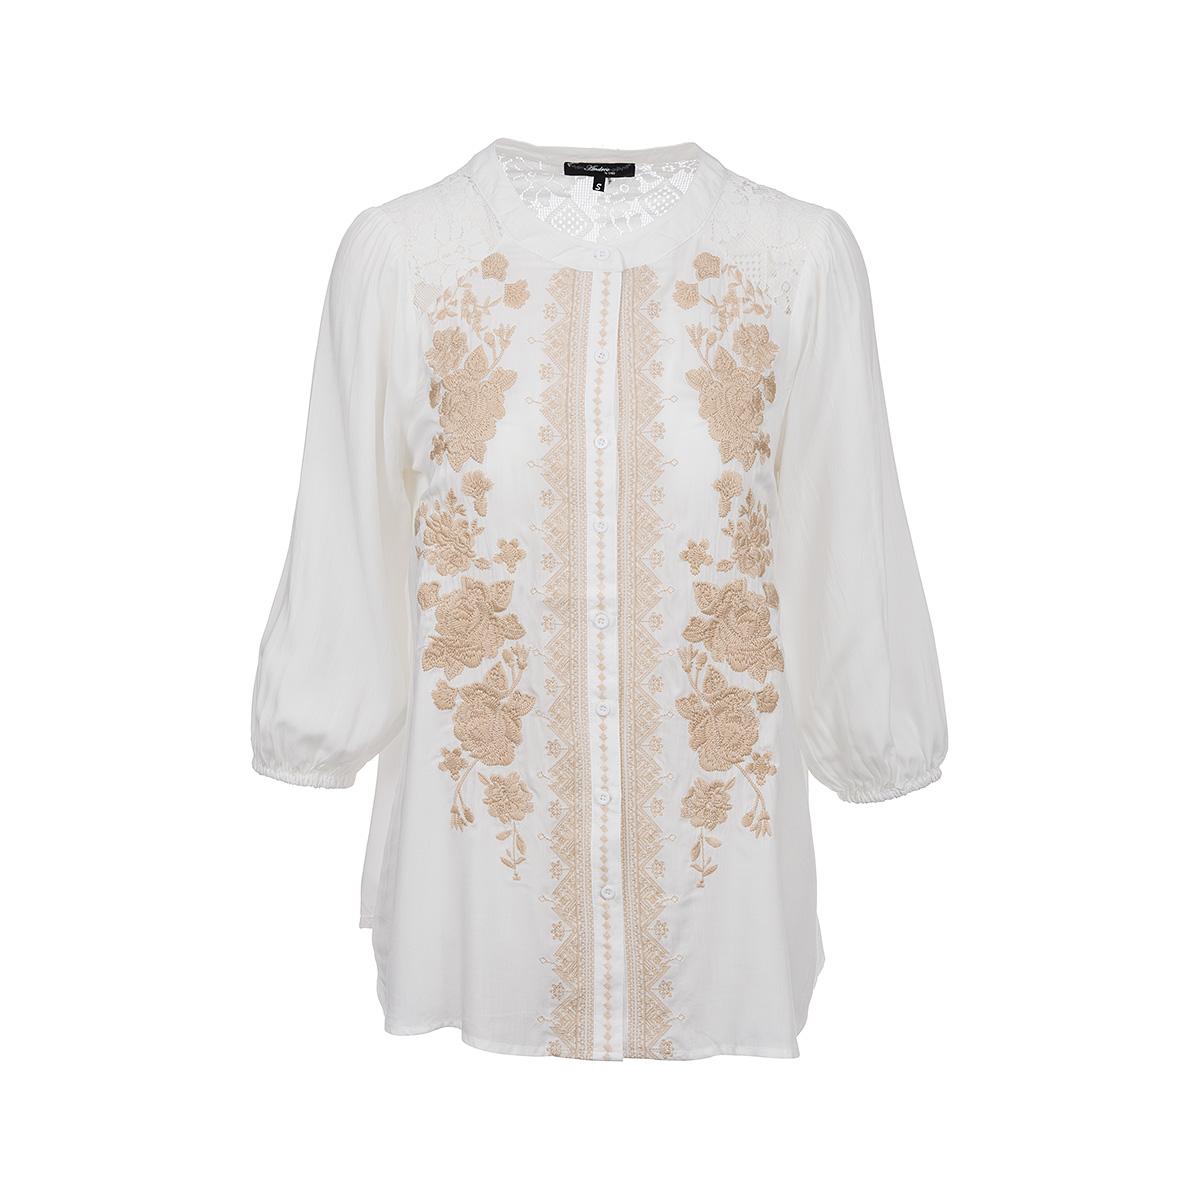 Mast General Store | Women's Khaki Embroidered Blouse